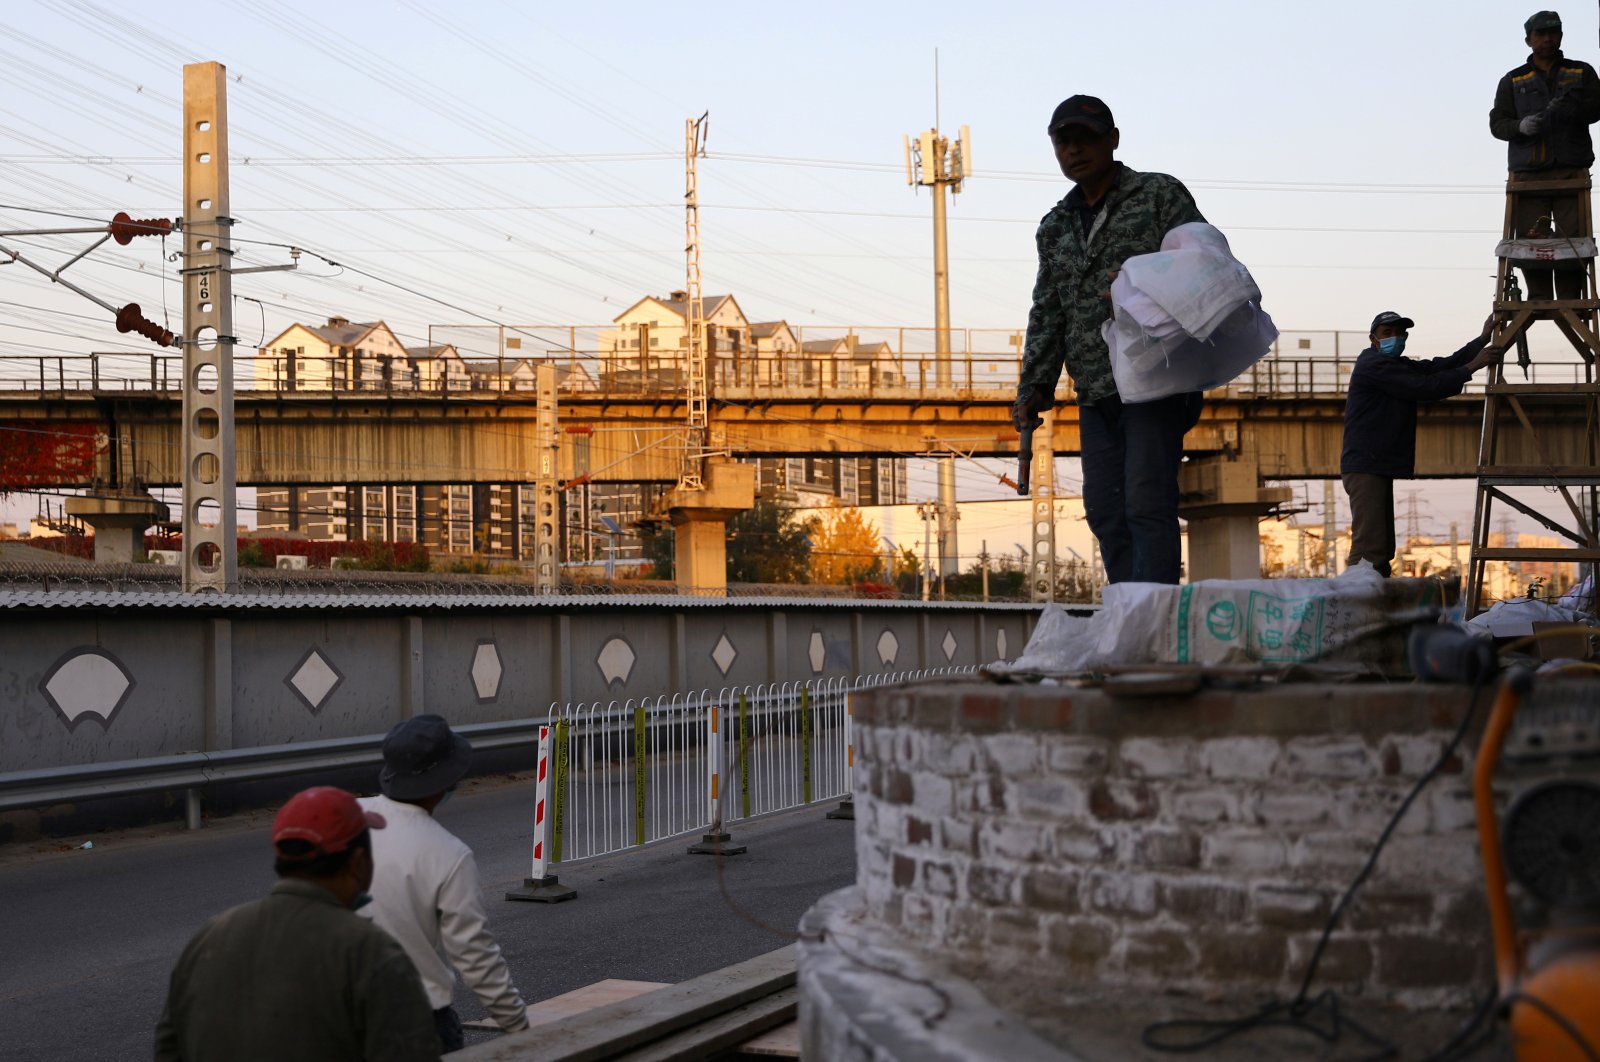 Construction workers work near residential buildings and railway tracks in Beijing, China, Oct. 31, 2021. (Reuters Photo)